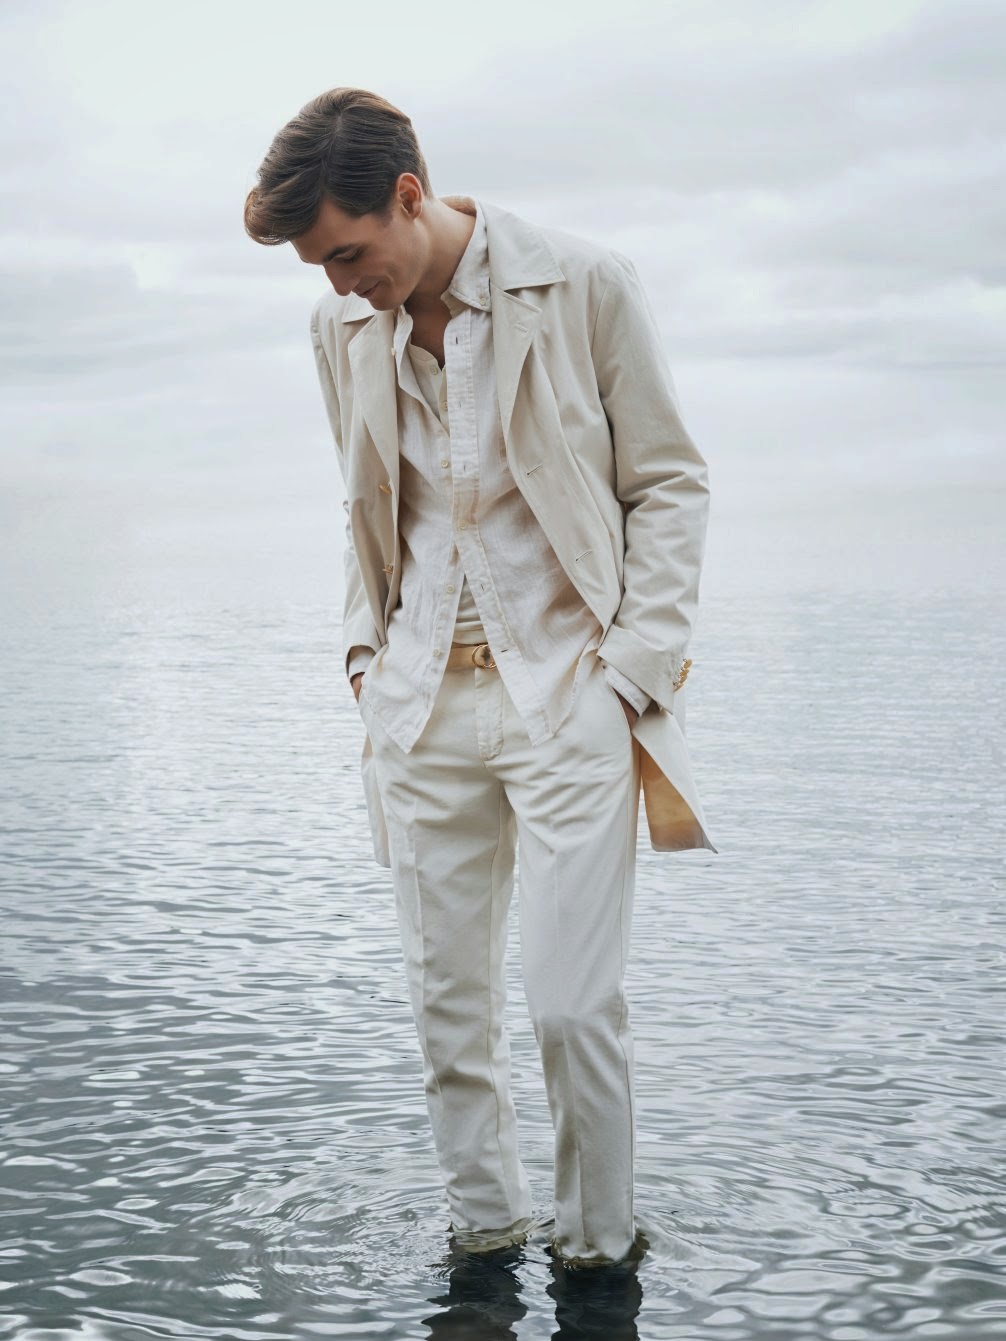 CHAD'S DRYGOODS: GANT RUGGER WAVES - PRE FALL 2014